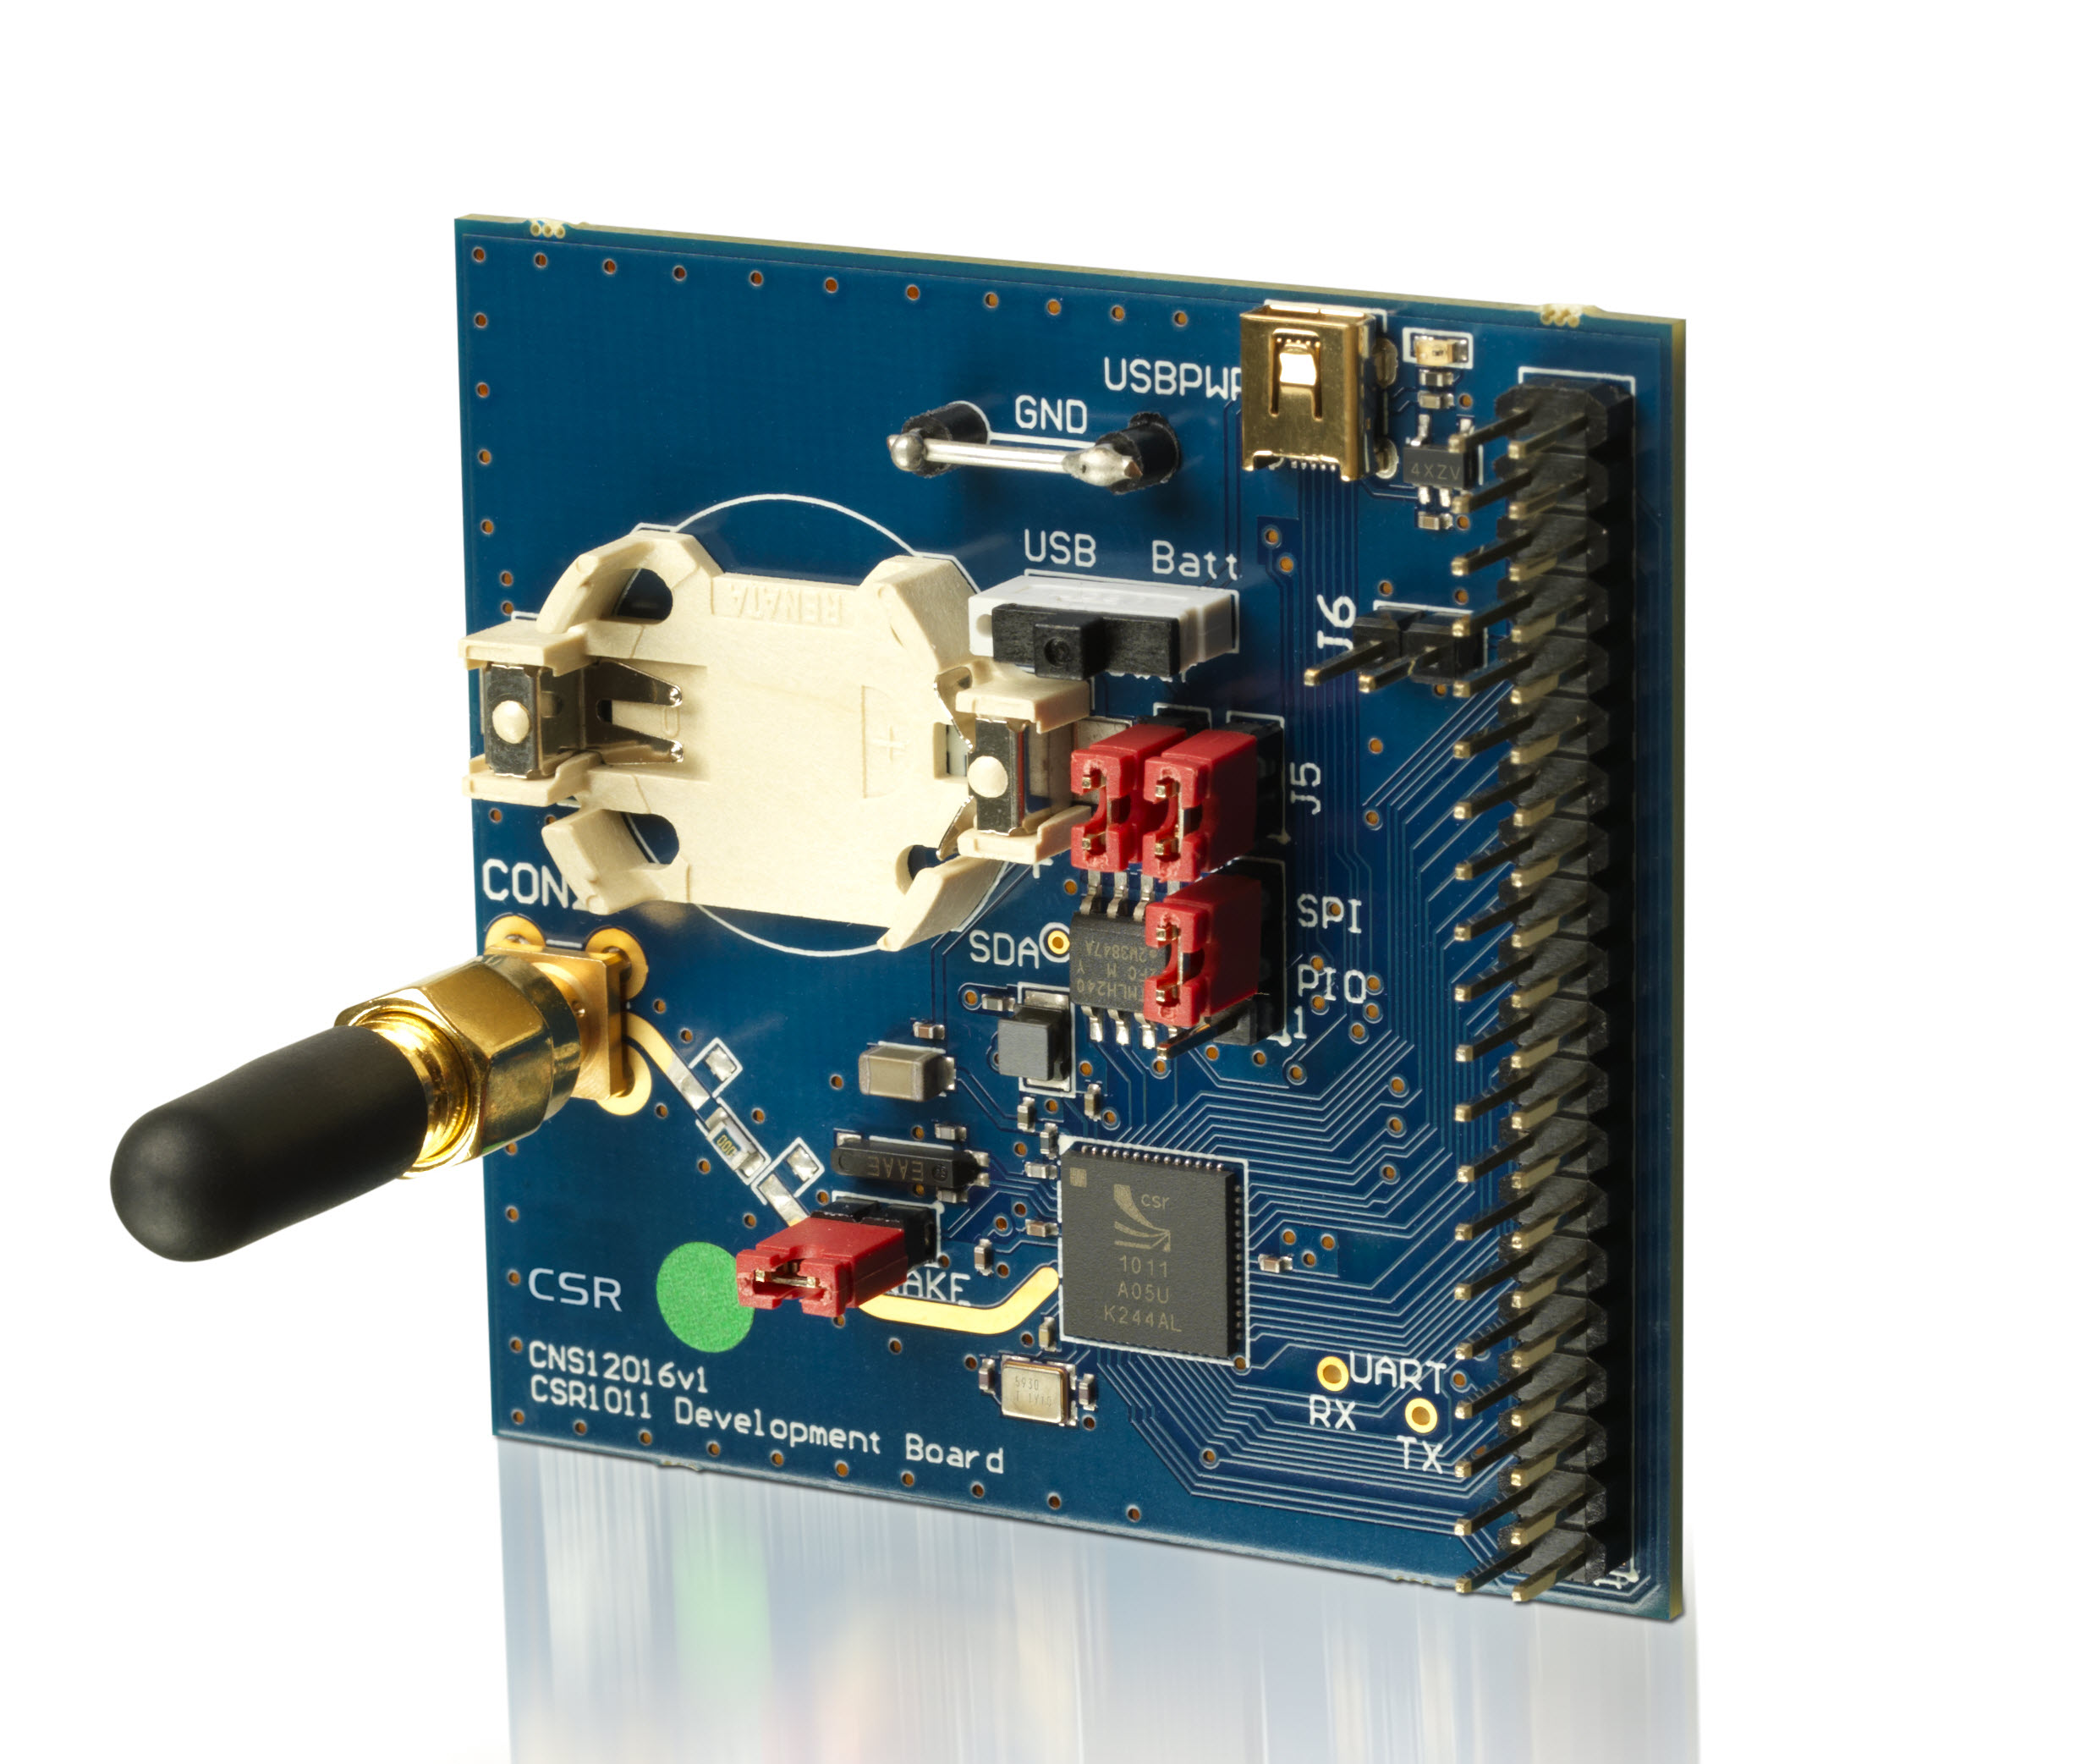 Figure 2: The CSR1011 development board gives developers full access to the chip’s features